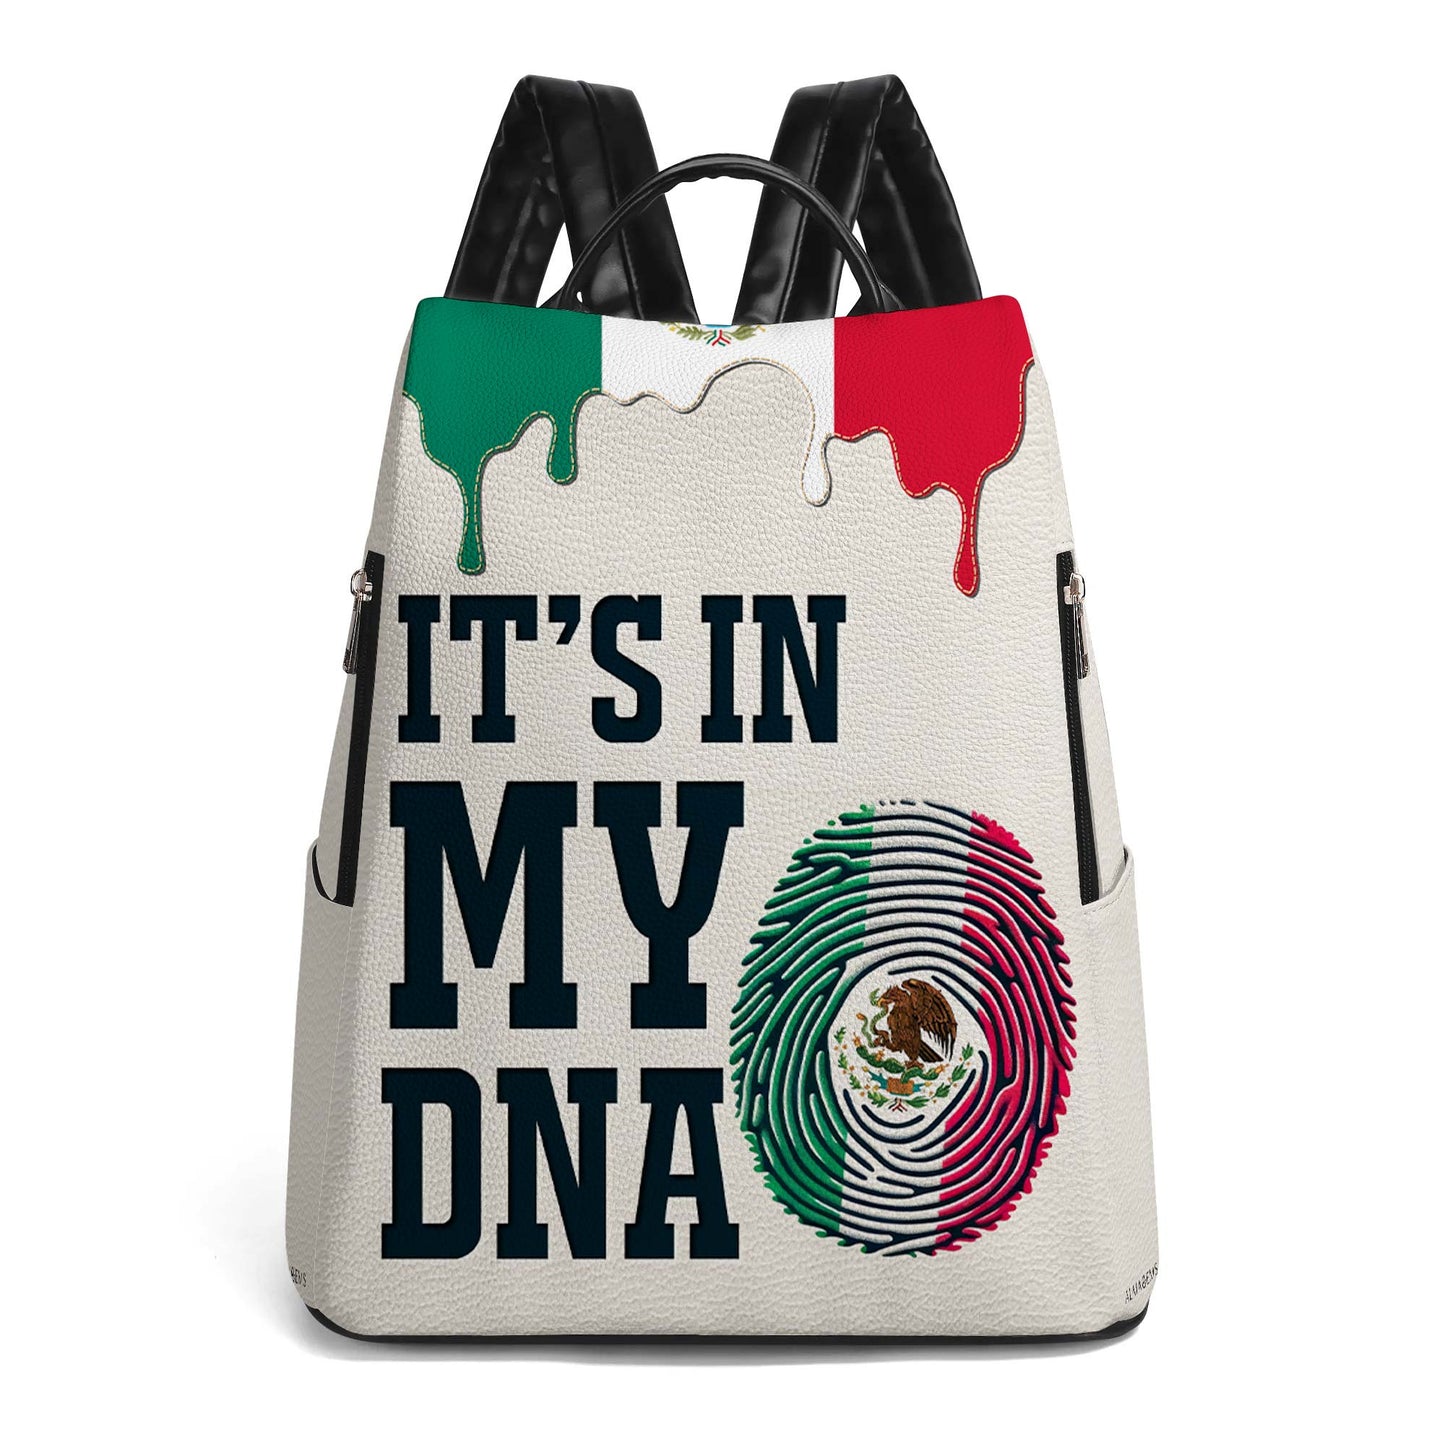 It's In My DNA - Personalized Leather BackPack - BP_MX11